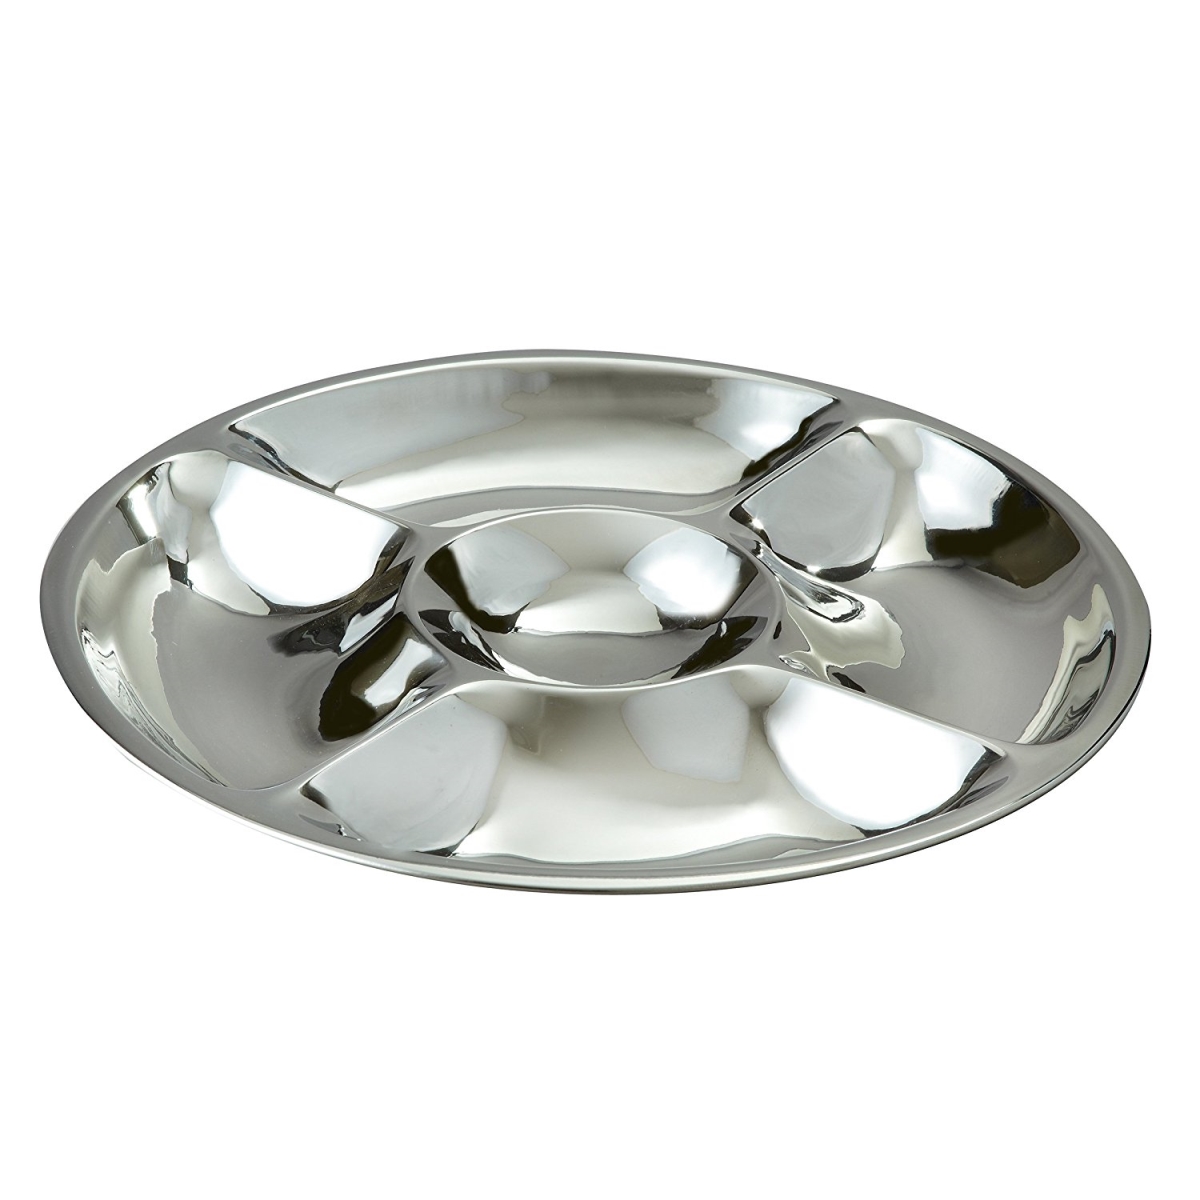 72569 Elegance Silver 5 Section Dip & Serve Tray, 15 In.